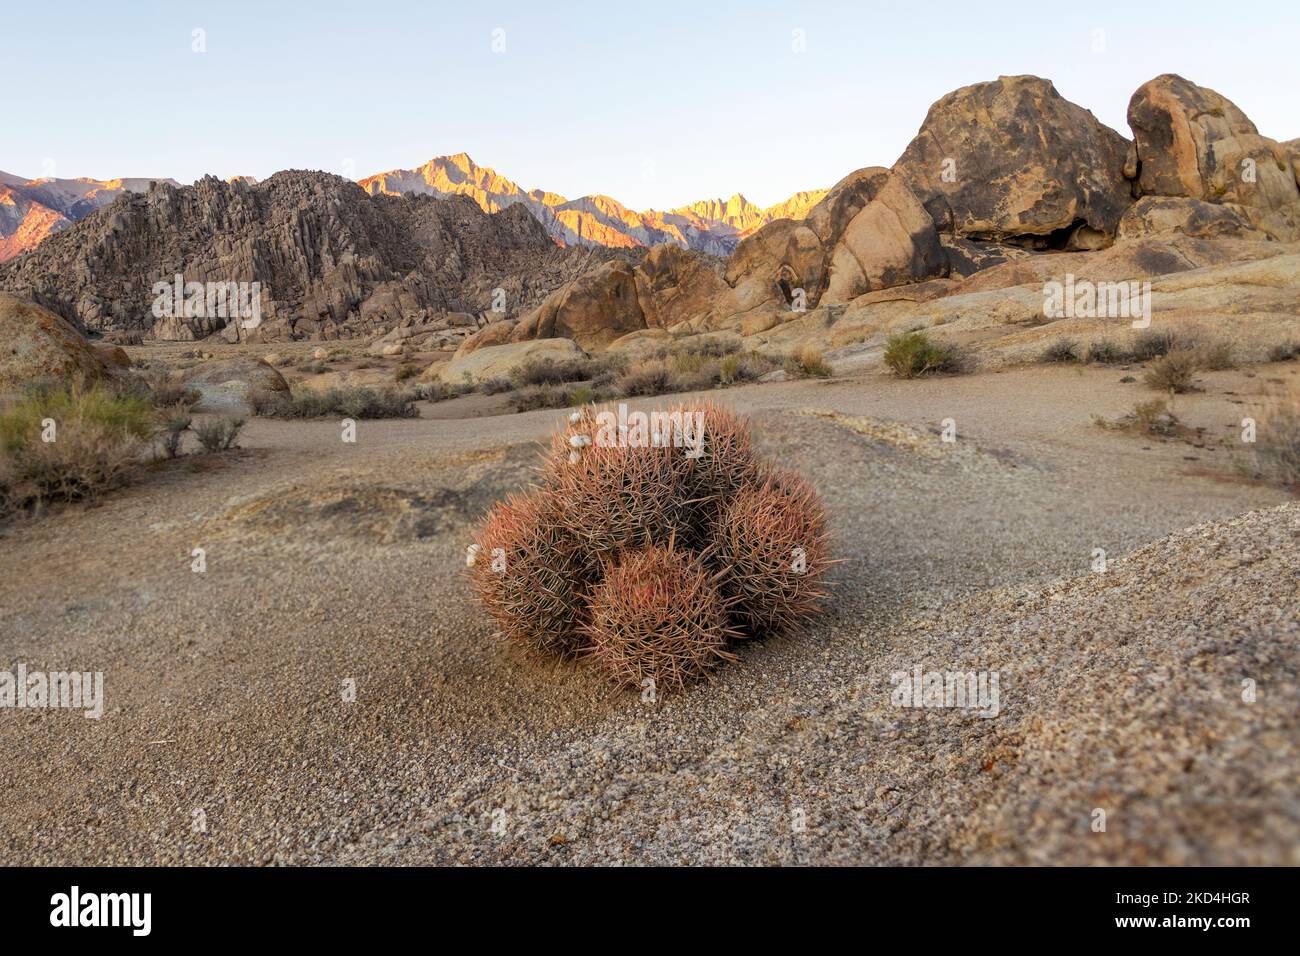 Prickly cactus plant in foreground with desert rocks and mountains in background. Stock Photo